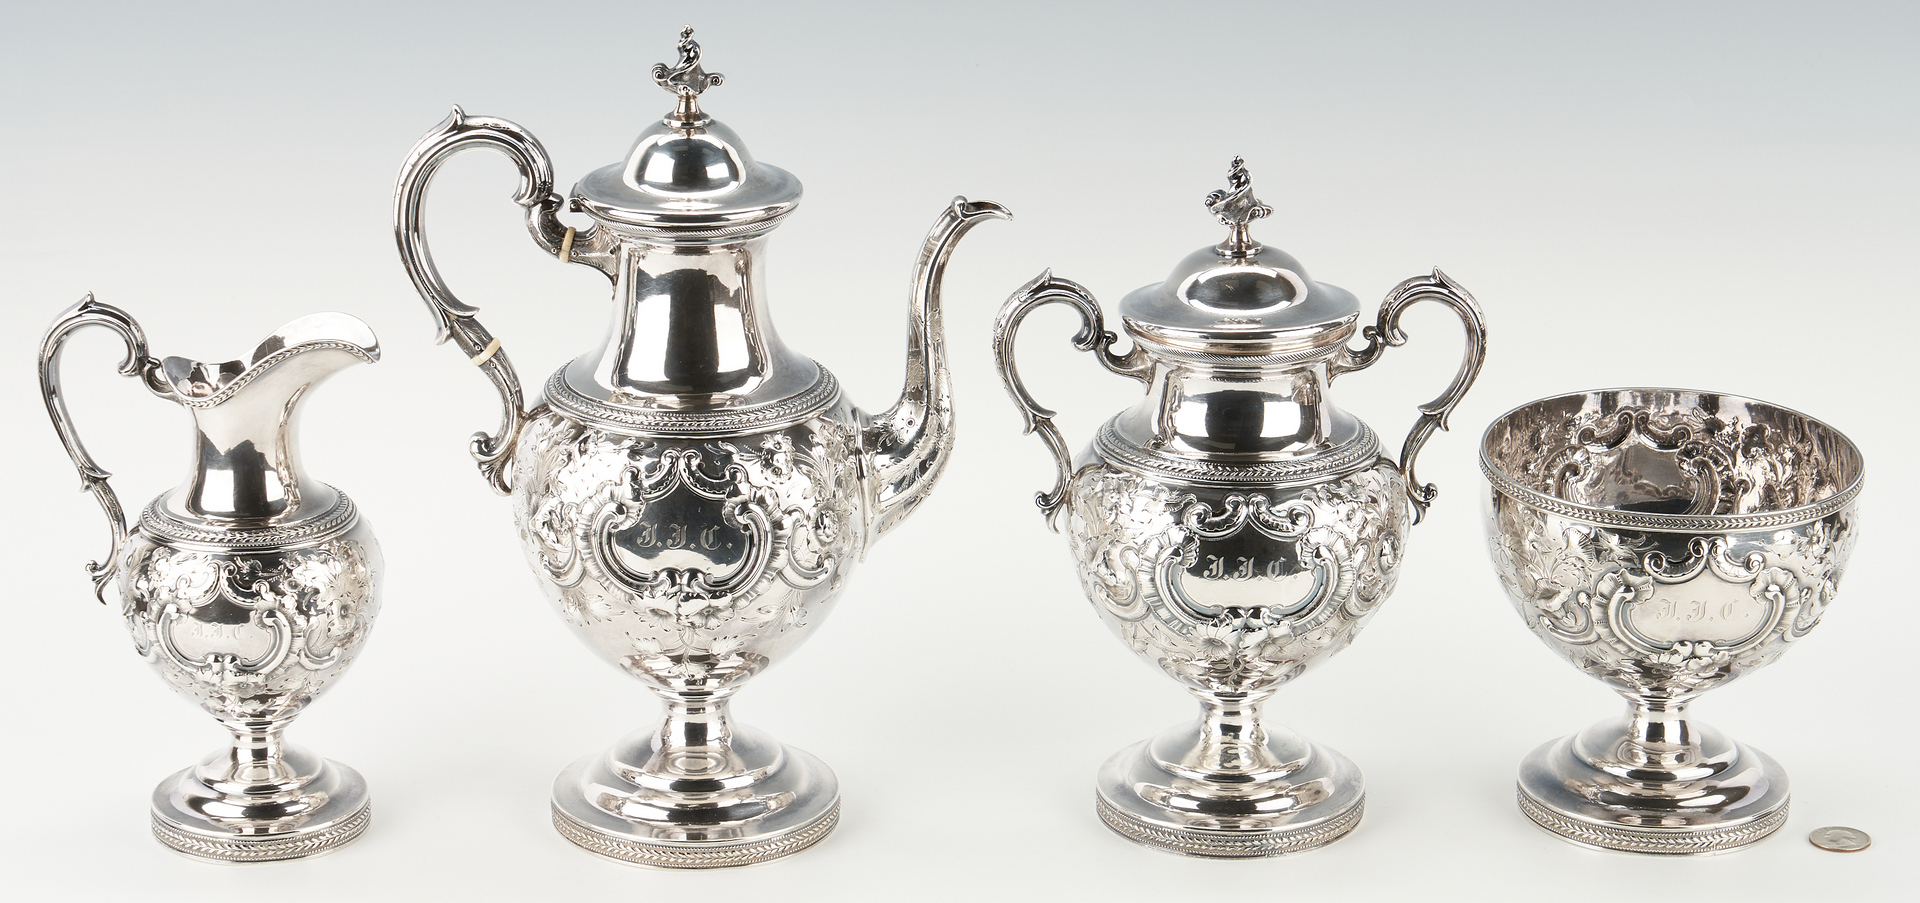 Lot 108: American Repousse Coin Silver Tea Service, NY